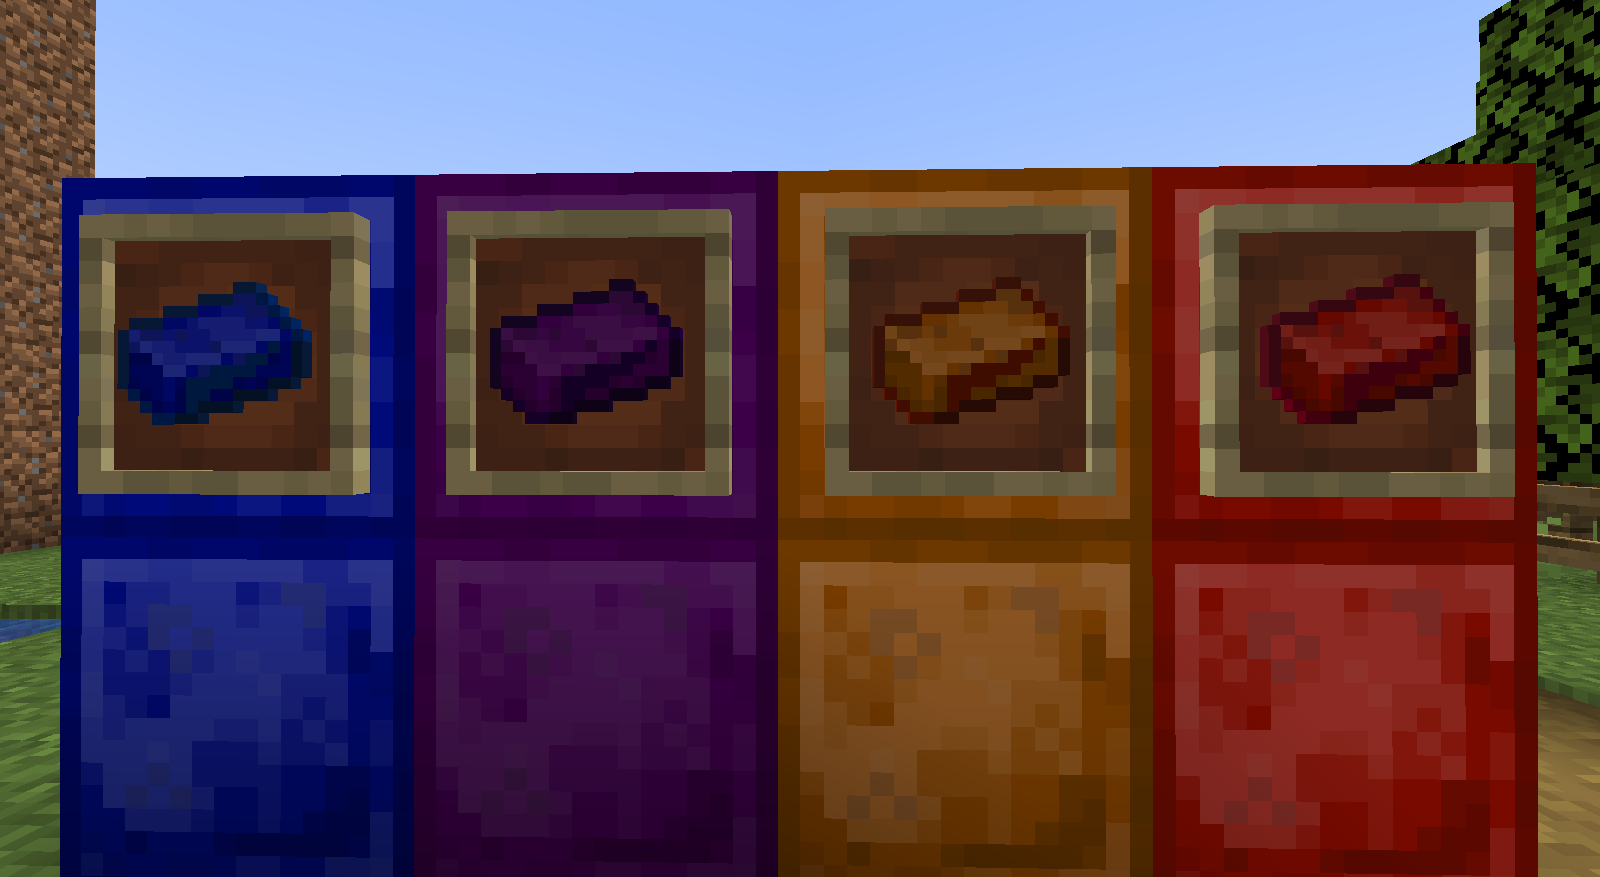 The ingots of the mod